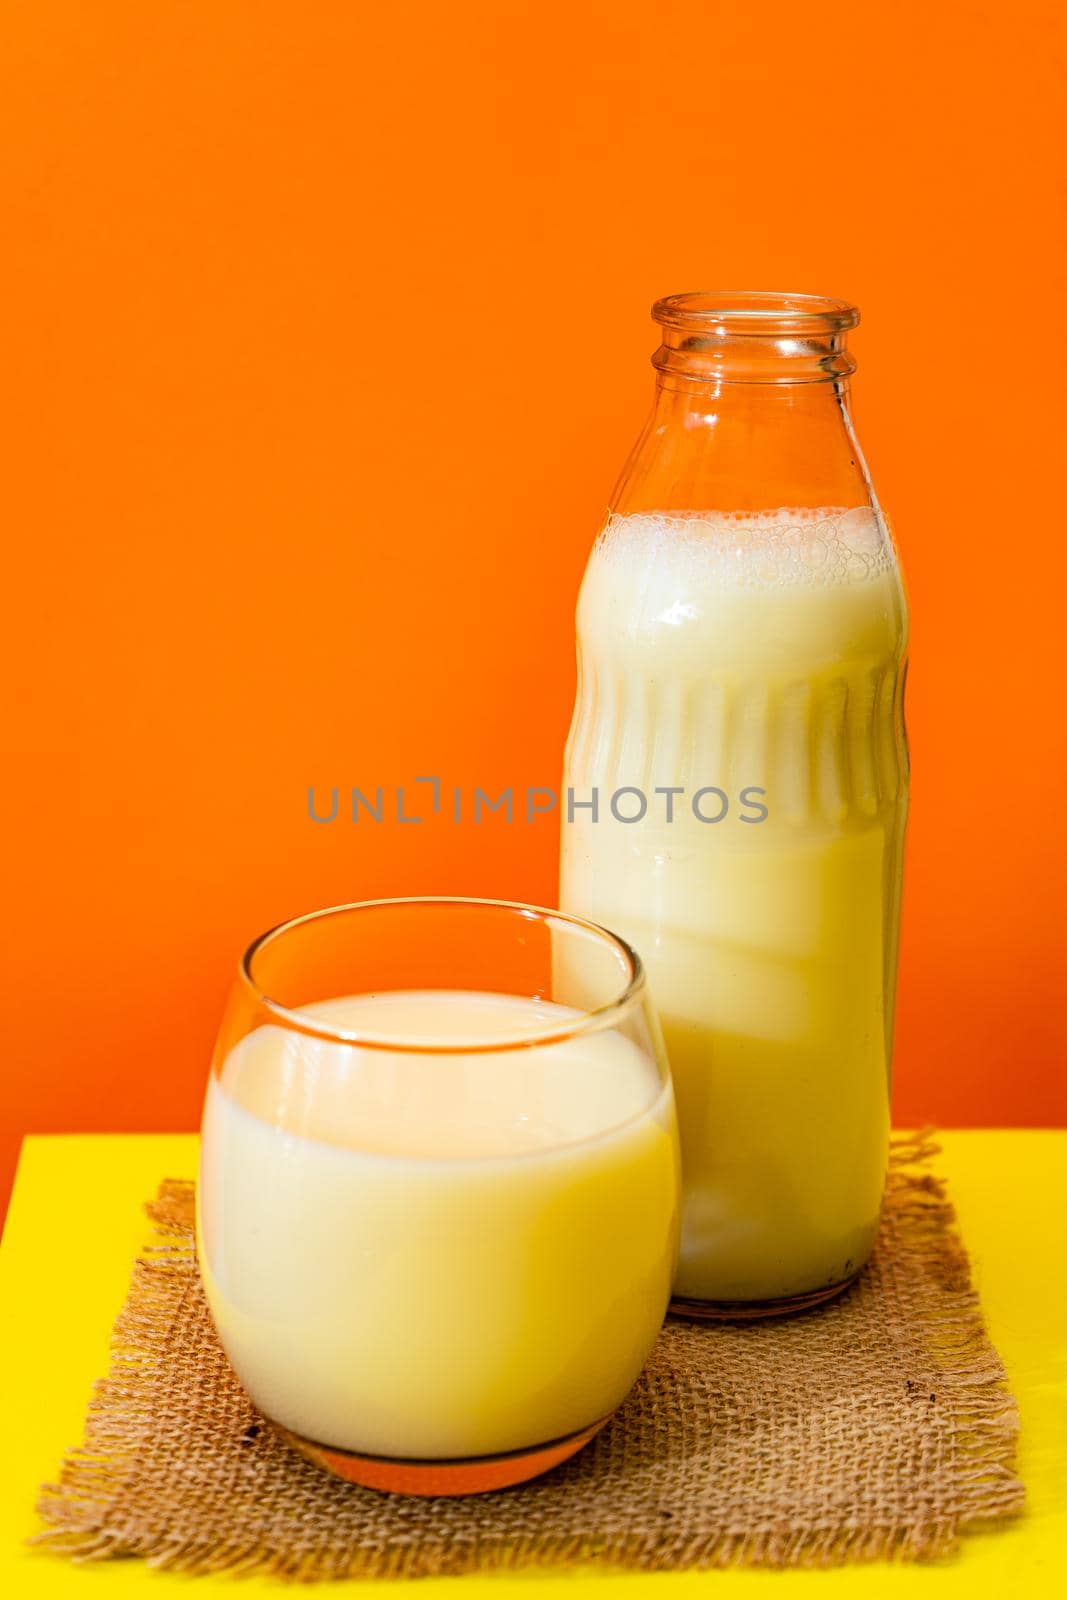 Glass bottle and big glass with milk on a square of rustic fabric on a yellow table with red background. Copy space. by hdcaputo